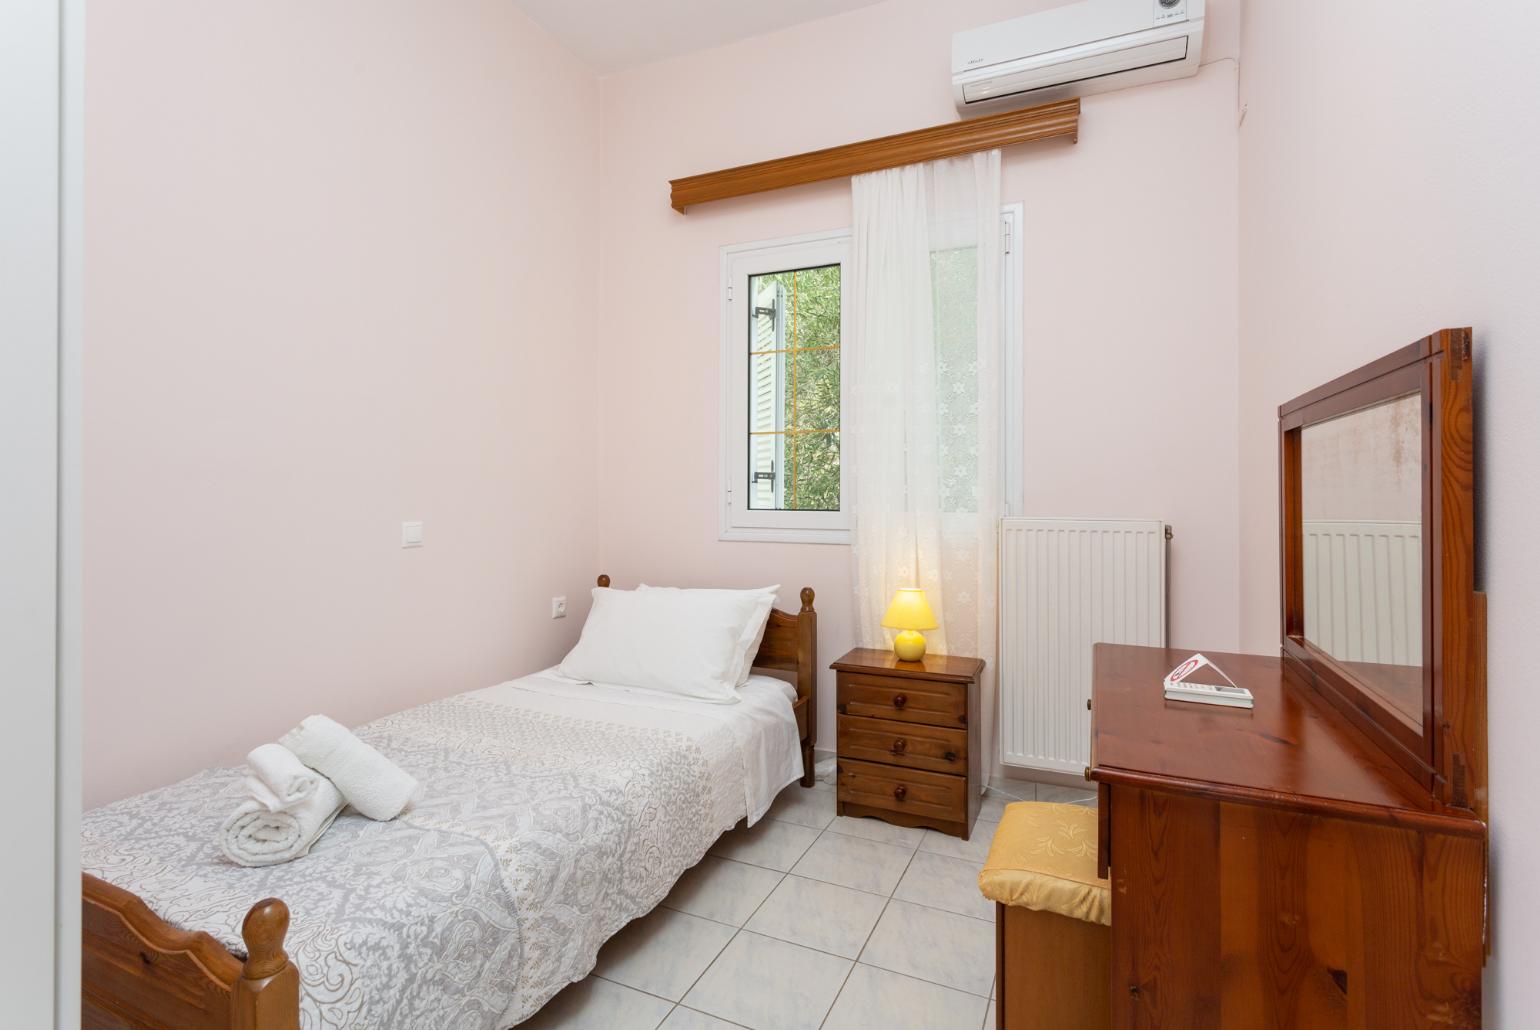 Single bedroom with A/C